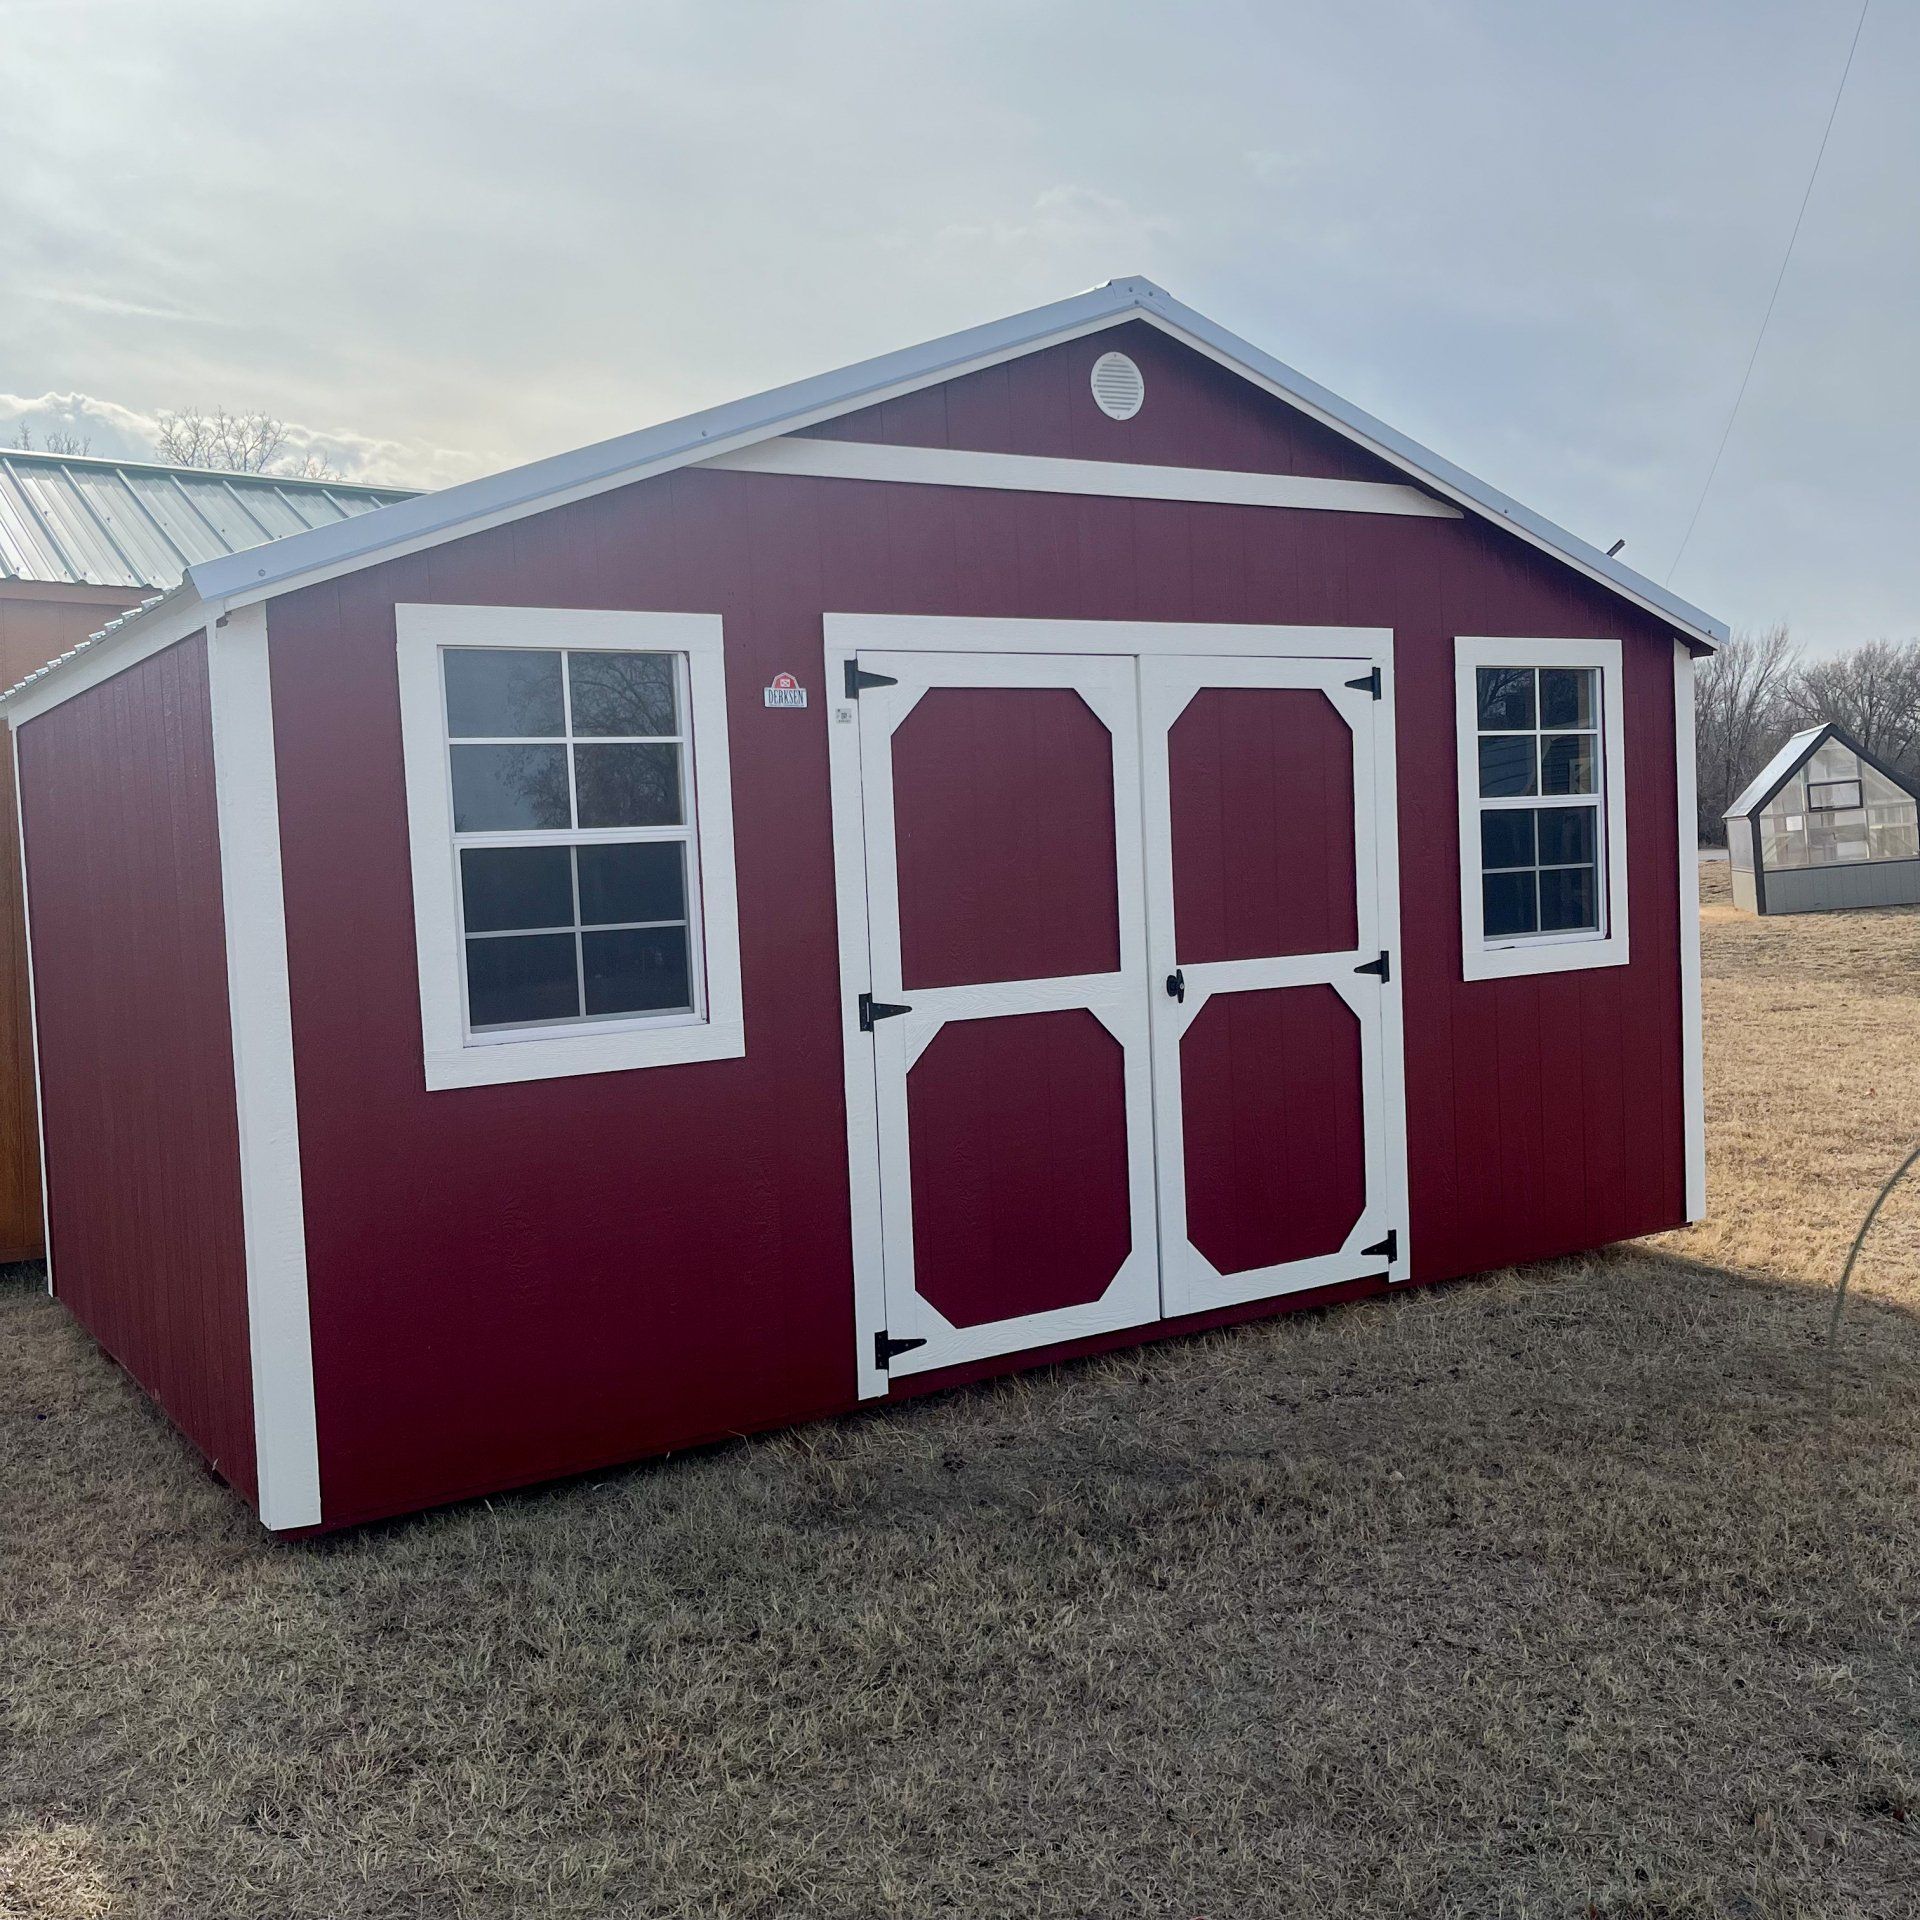 A red shed with white trim and windows is sitting in a field.